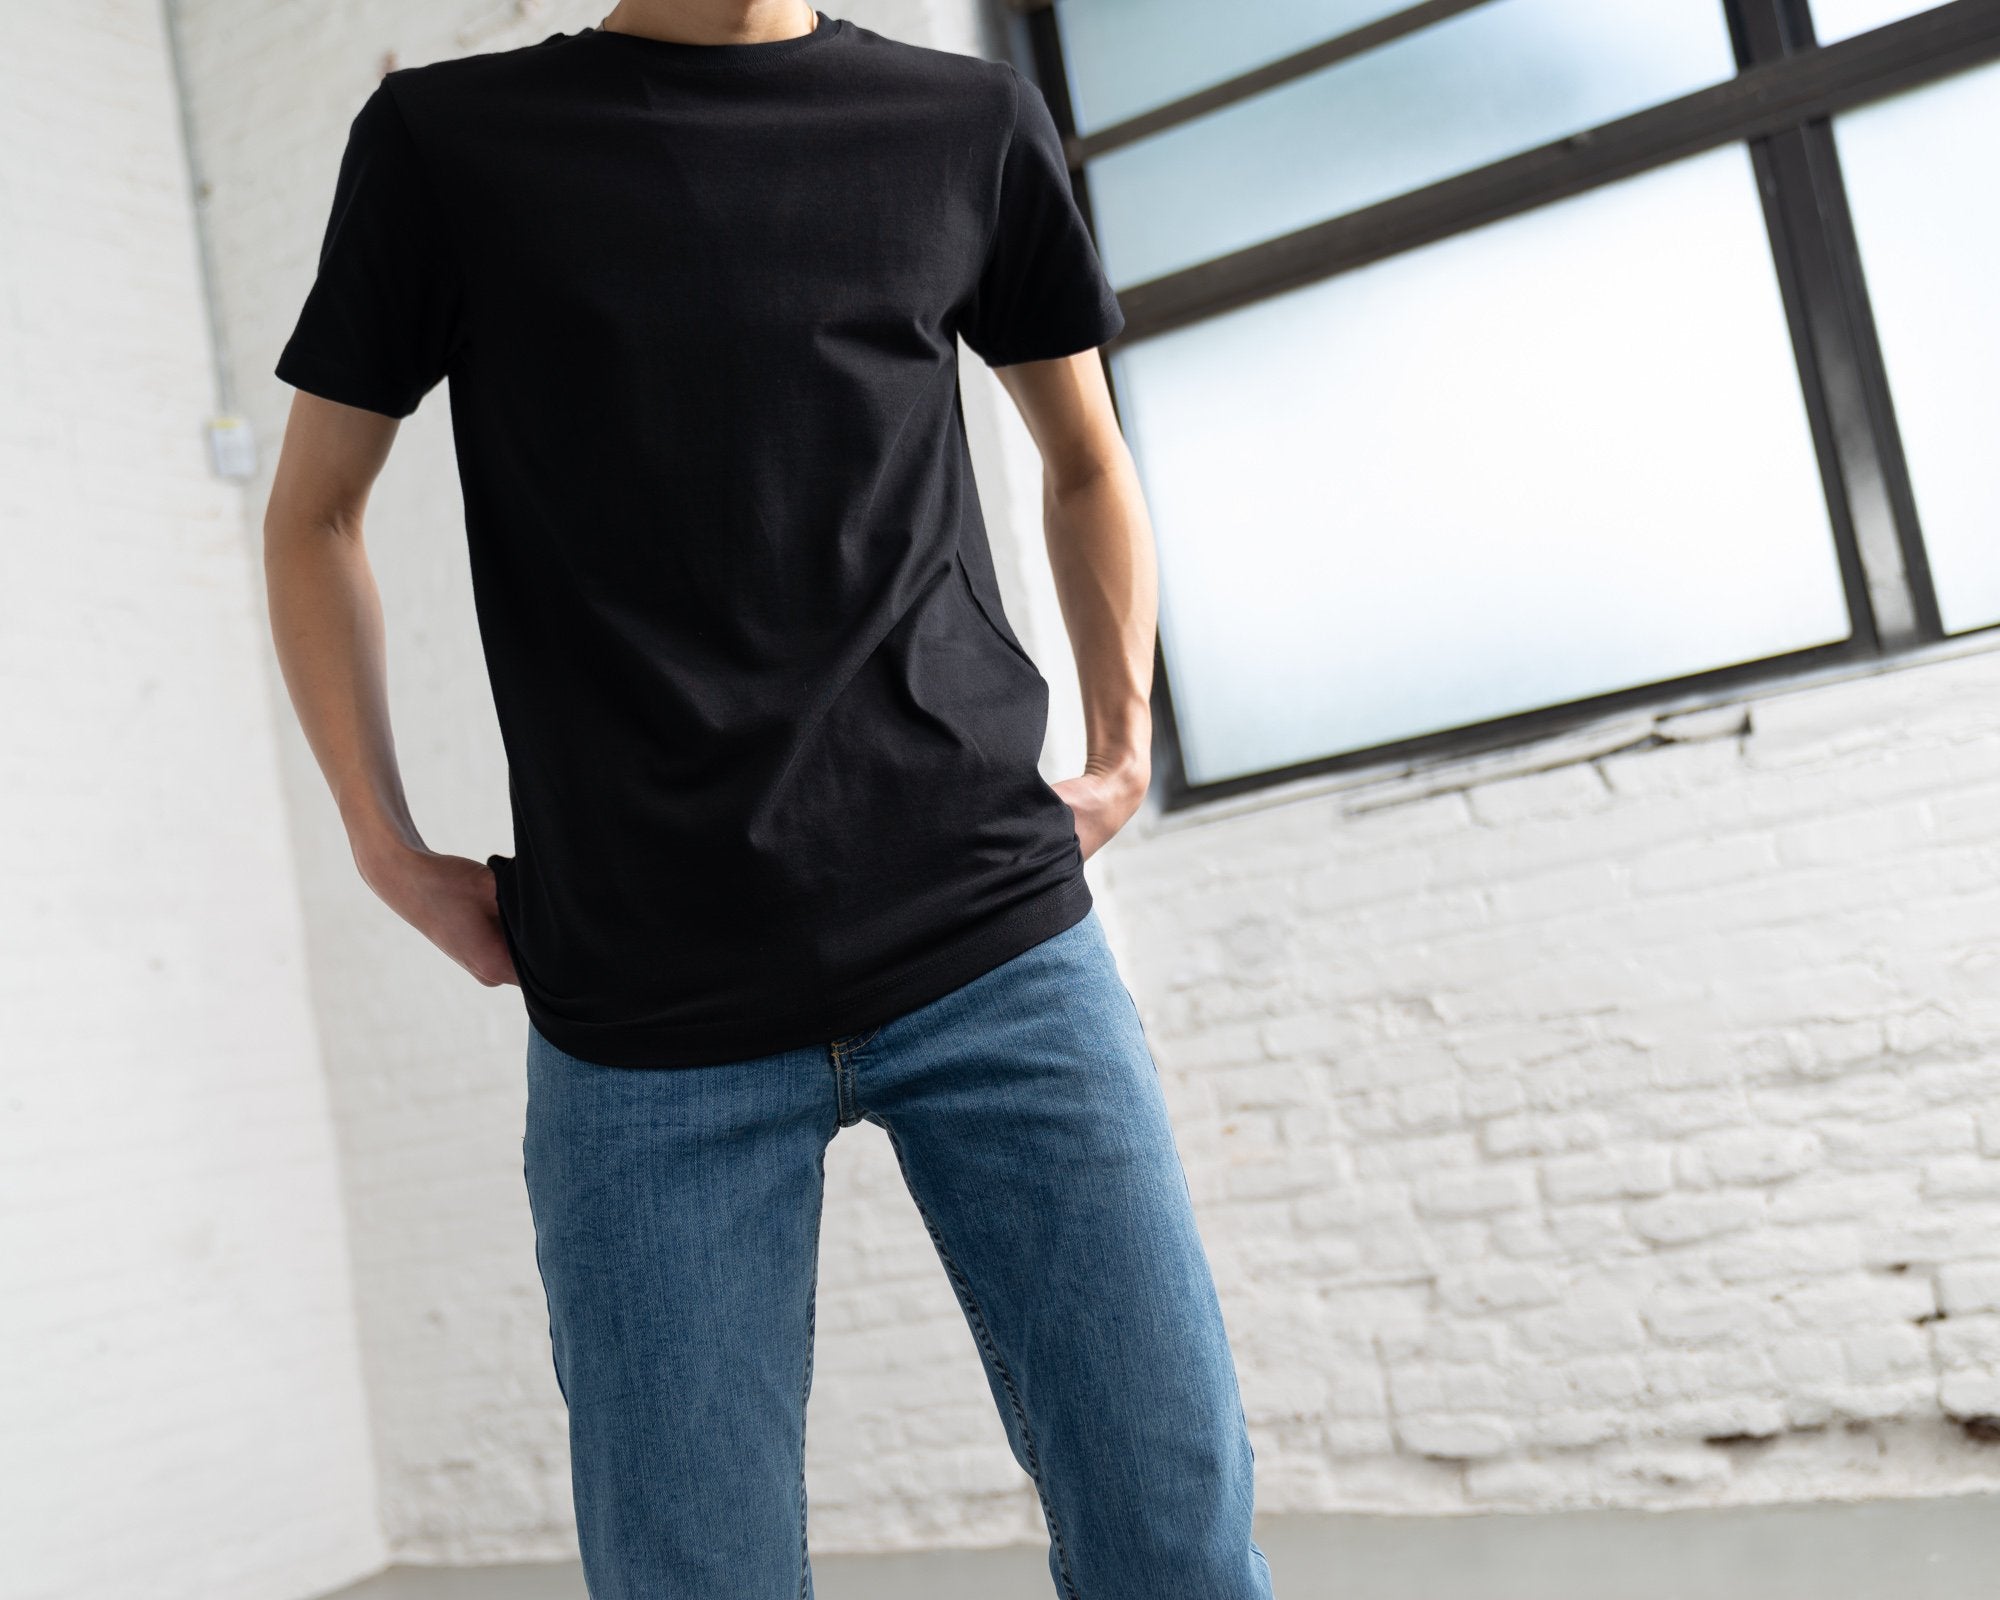 Fitted Color:Black Combed Cotton Men’s T-shirts